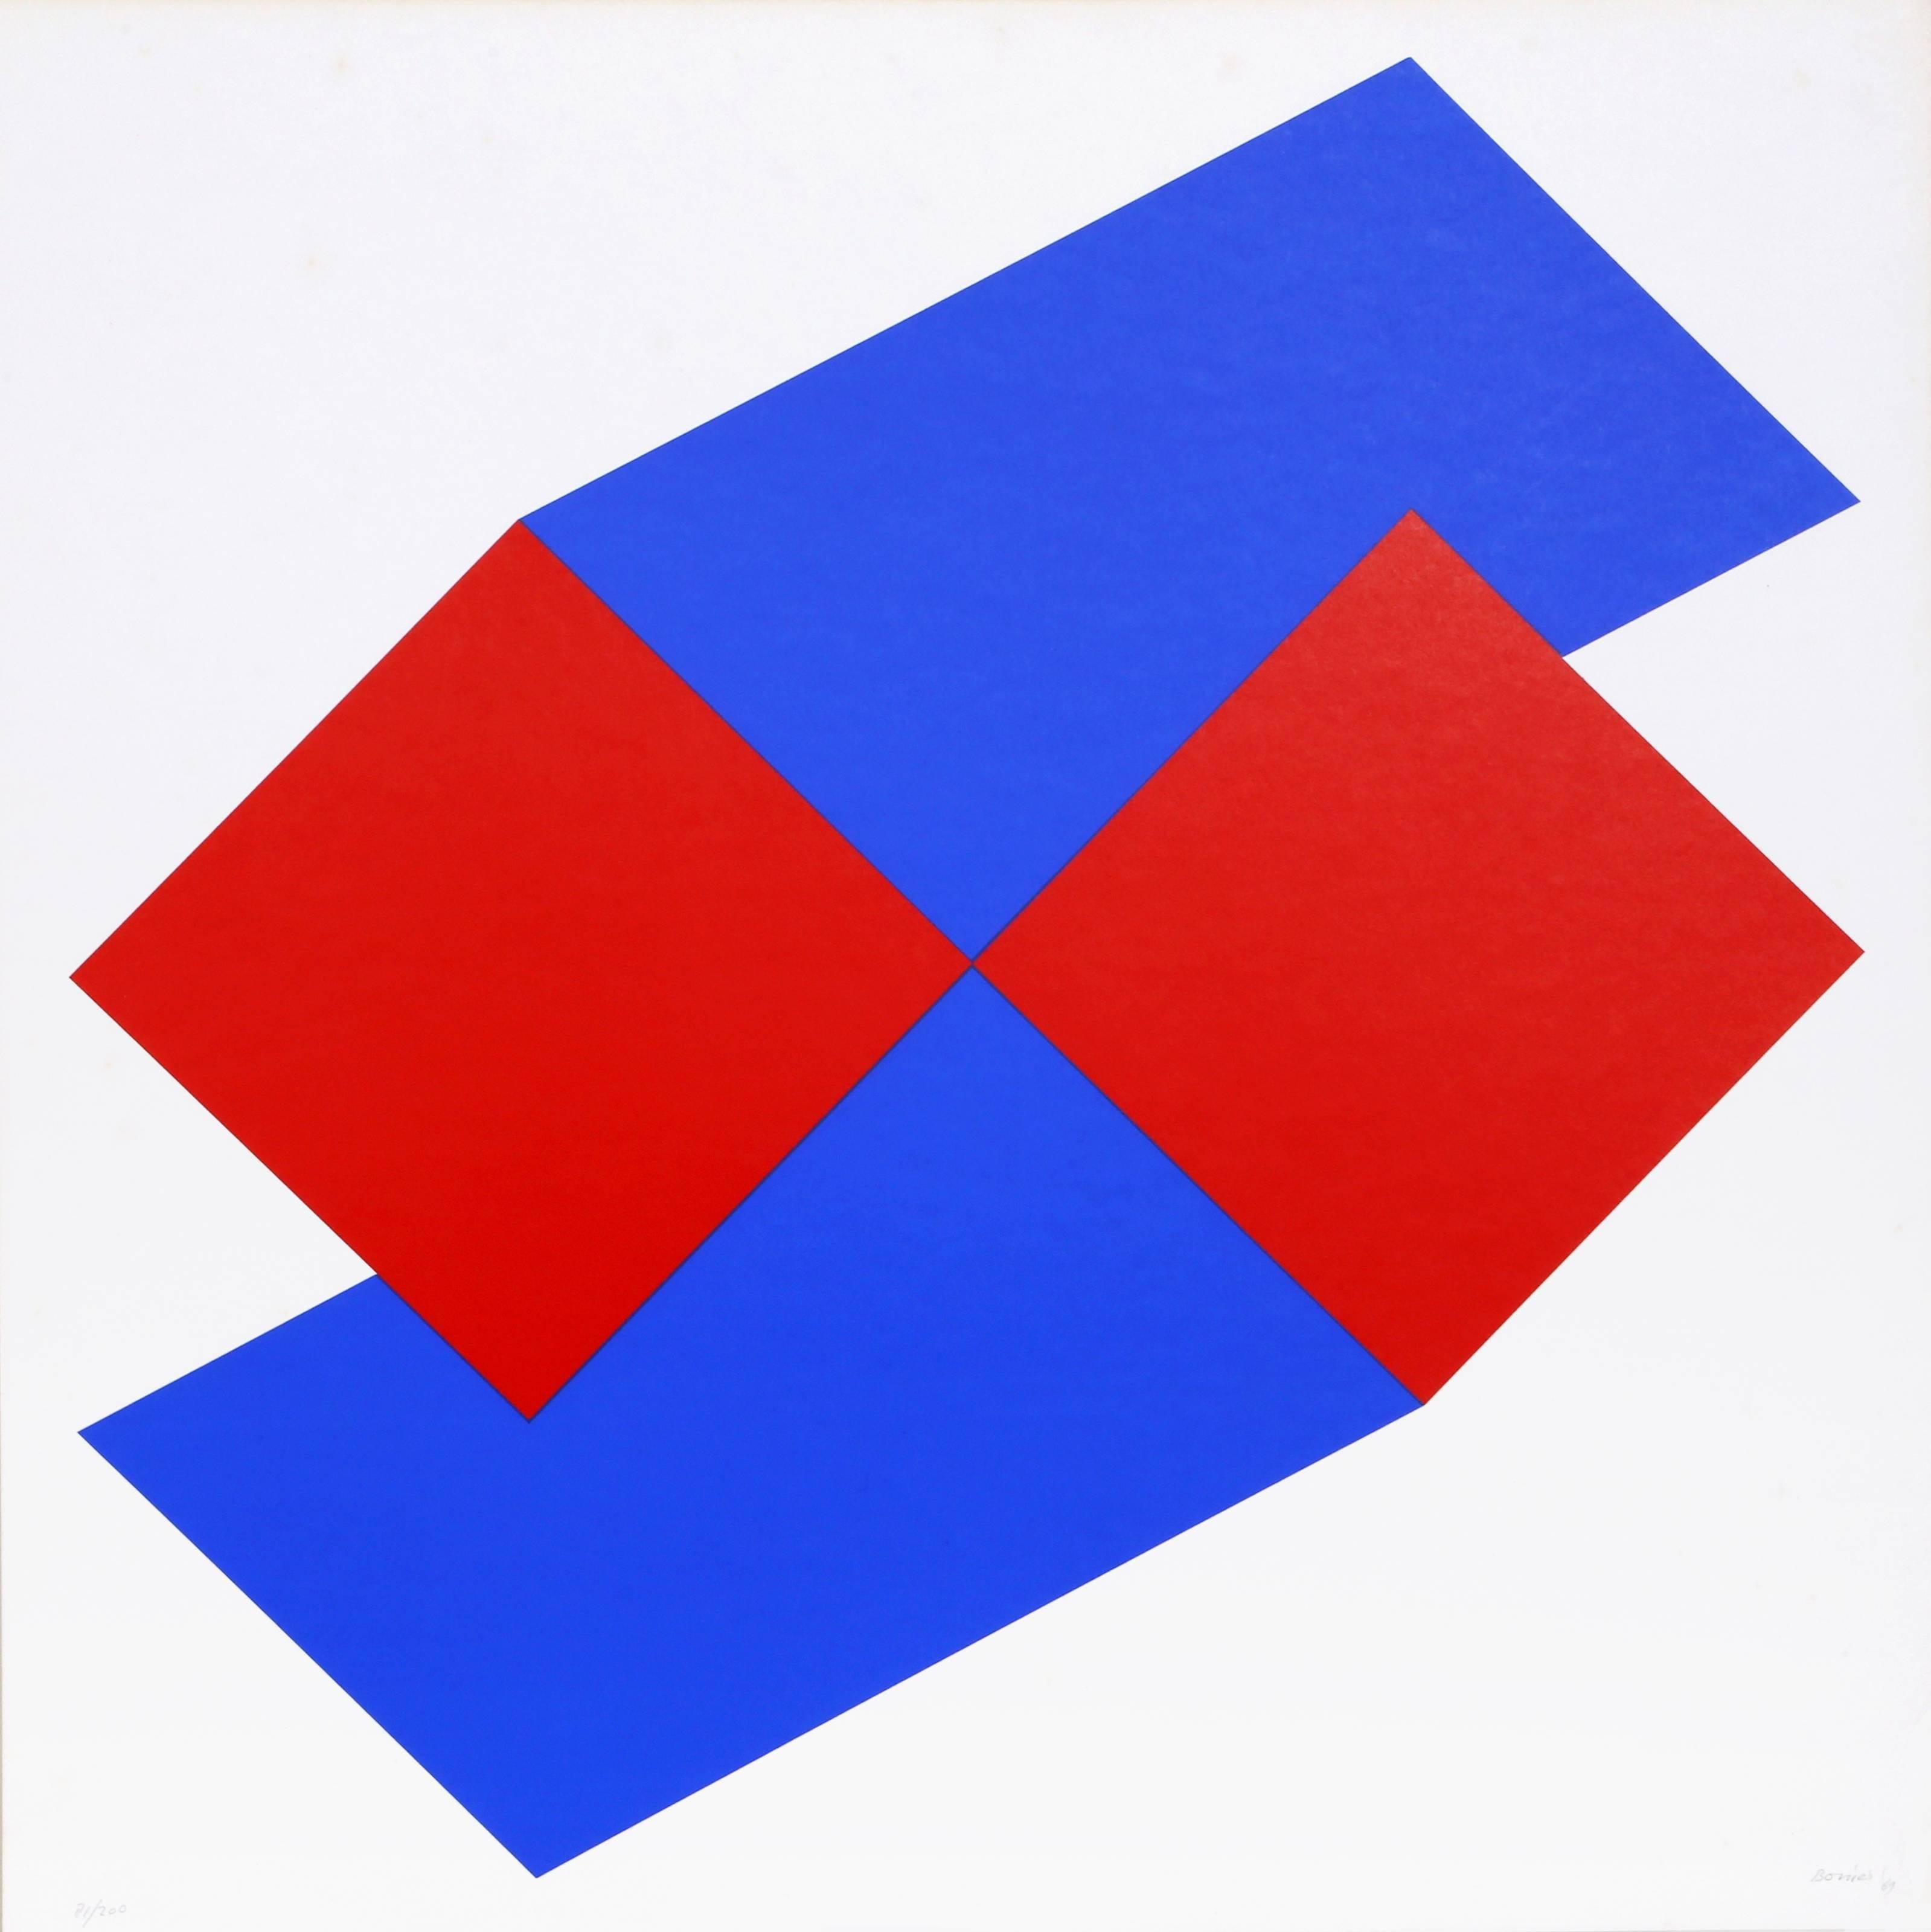 Untitled - Composition in Blue and Red II - Print by Bob Bonies